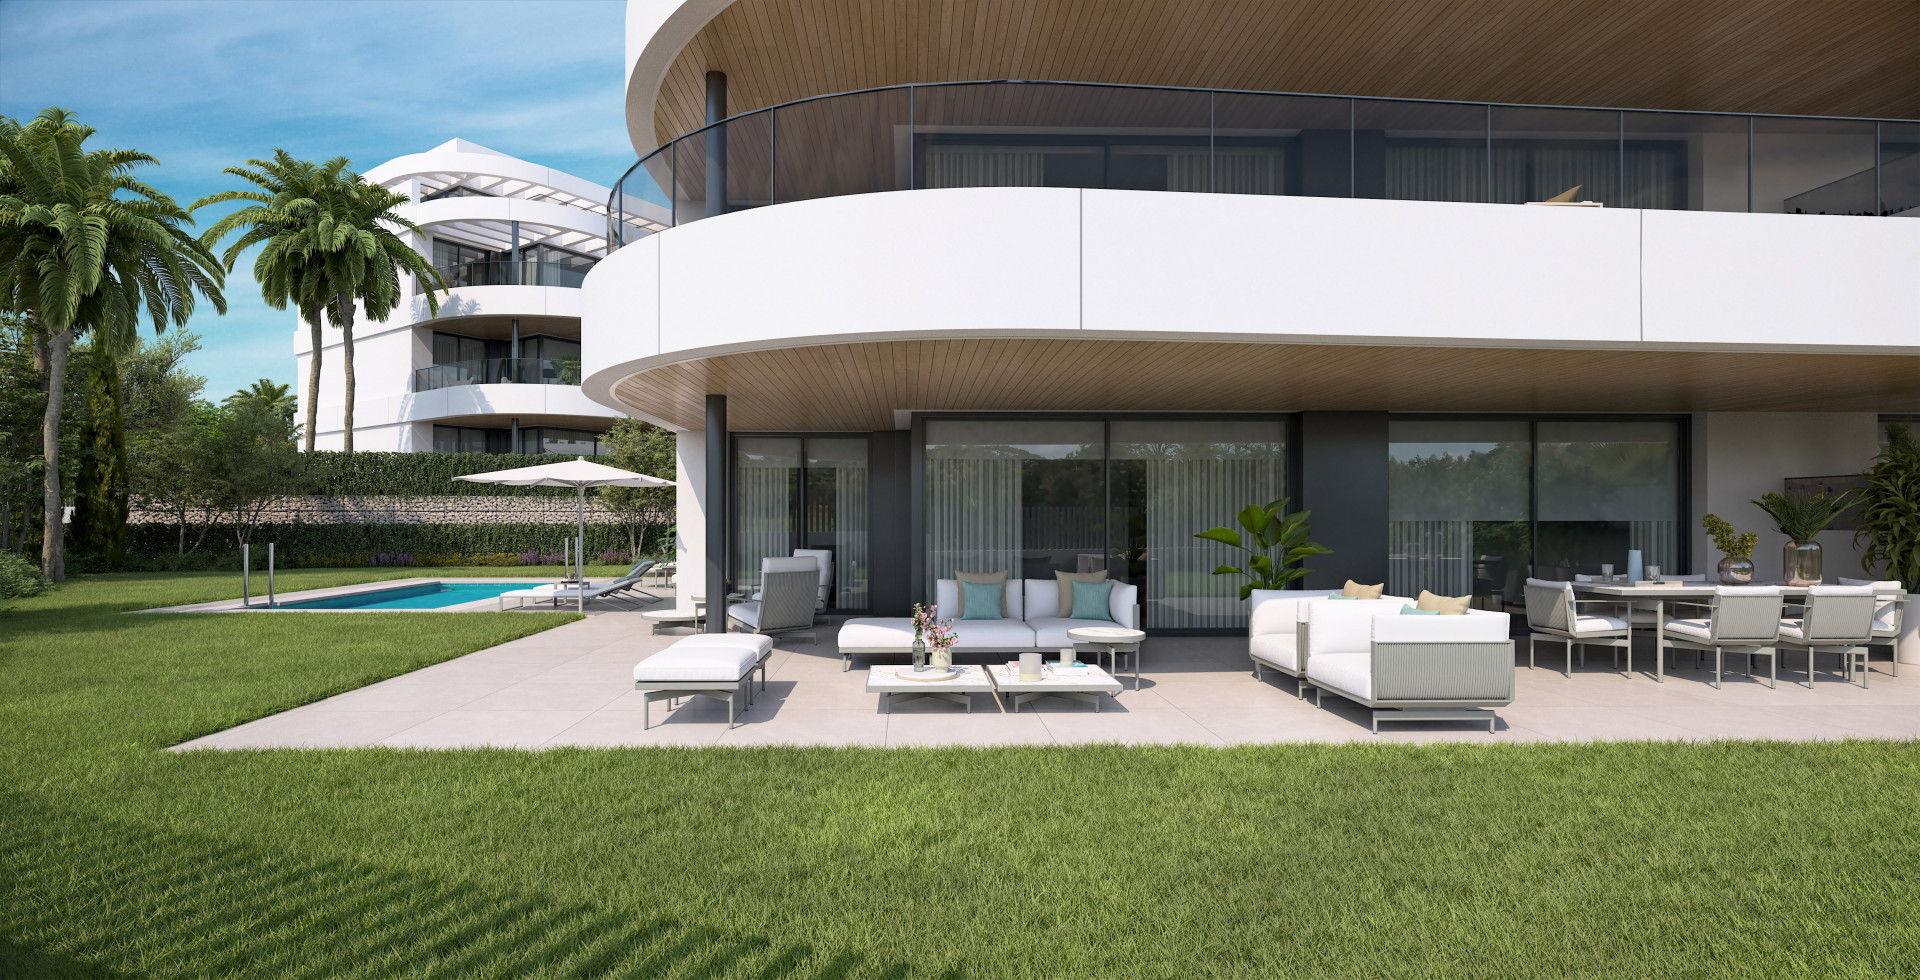 New development offering 88 units, comprising two and three bedroom apartments, duplex apartments and penthouses located in the El Paraiso/Atalaya area